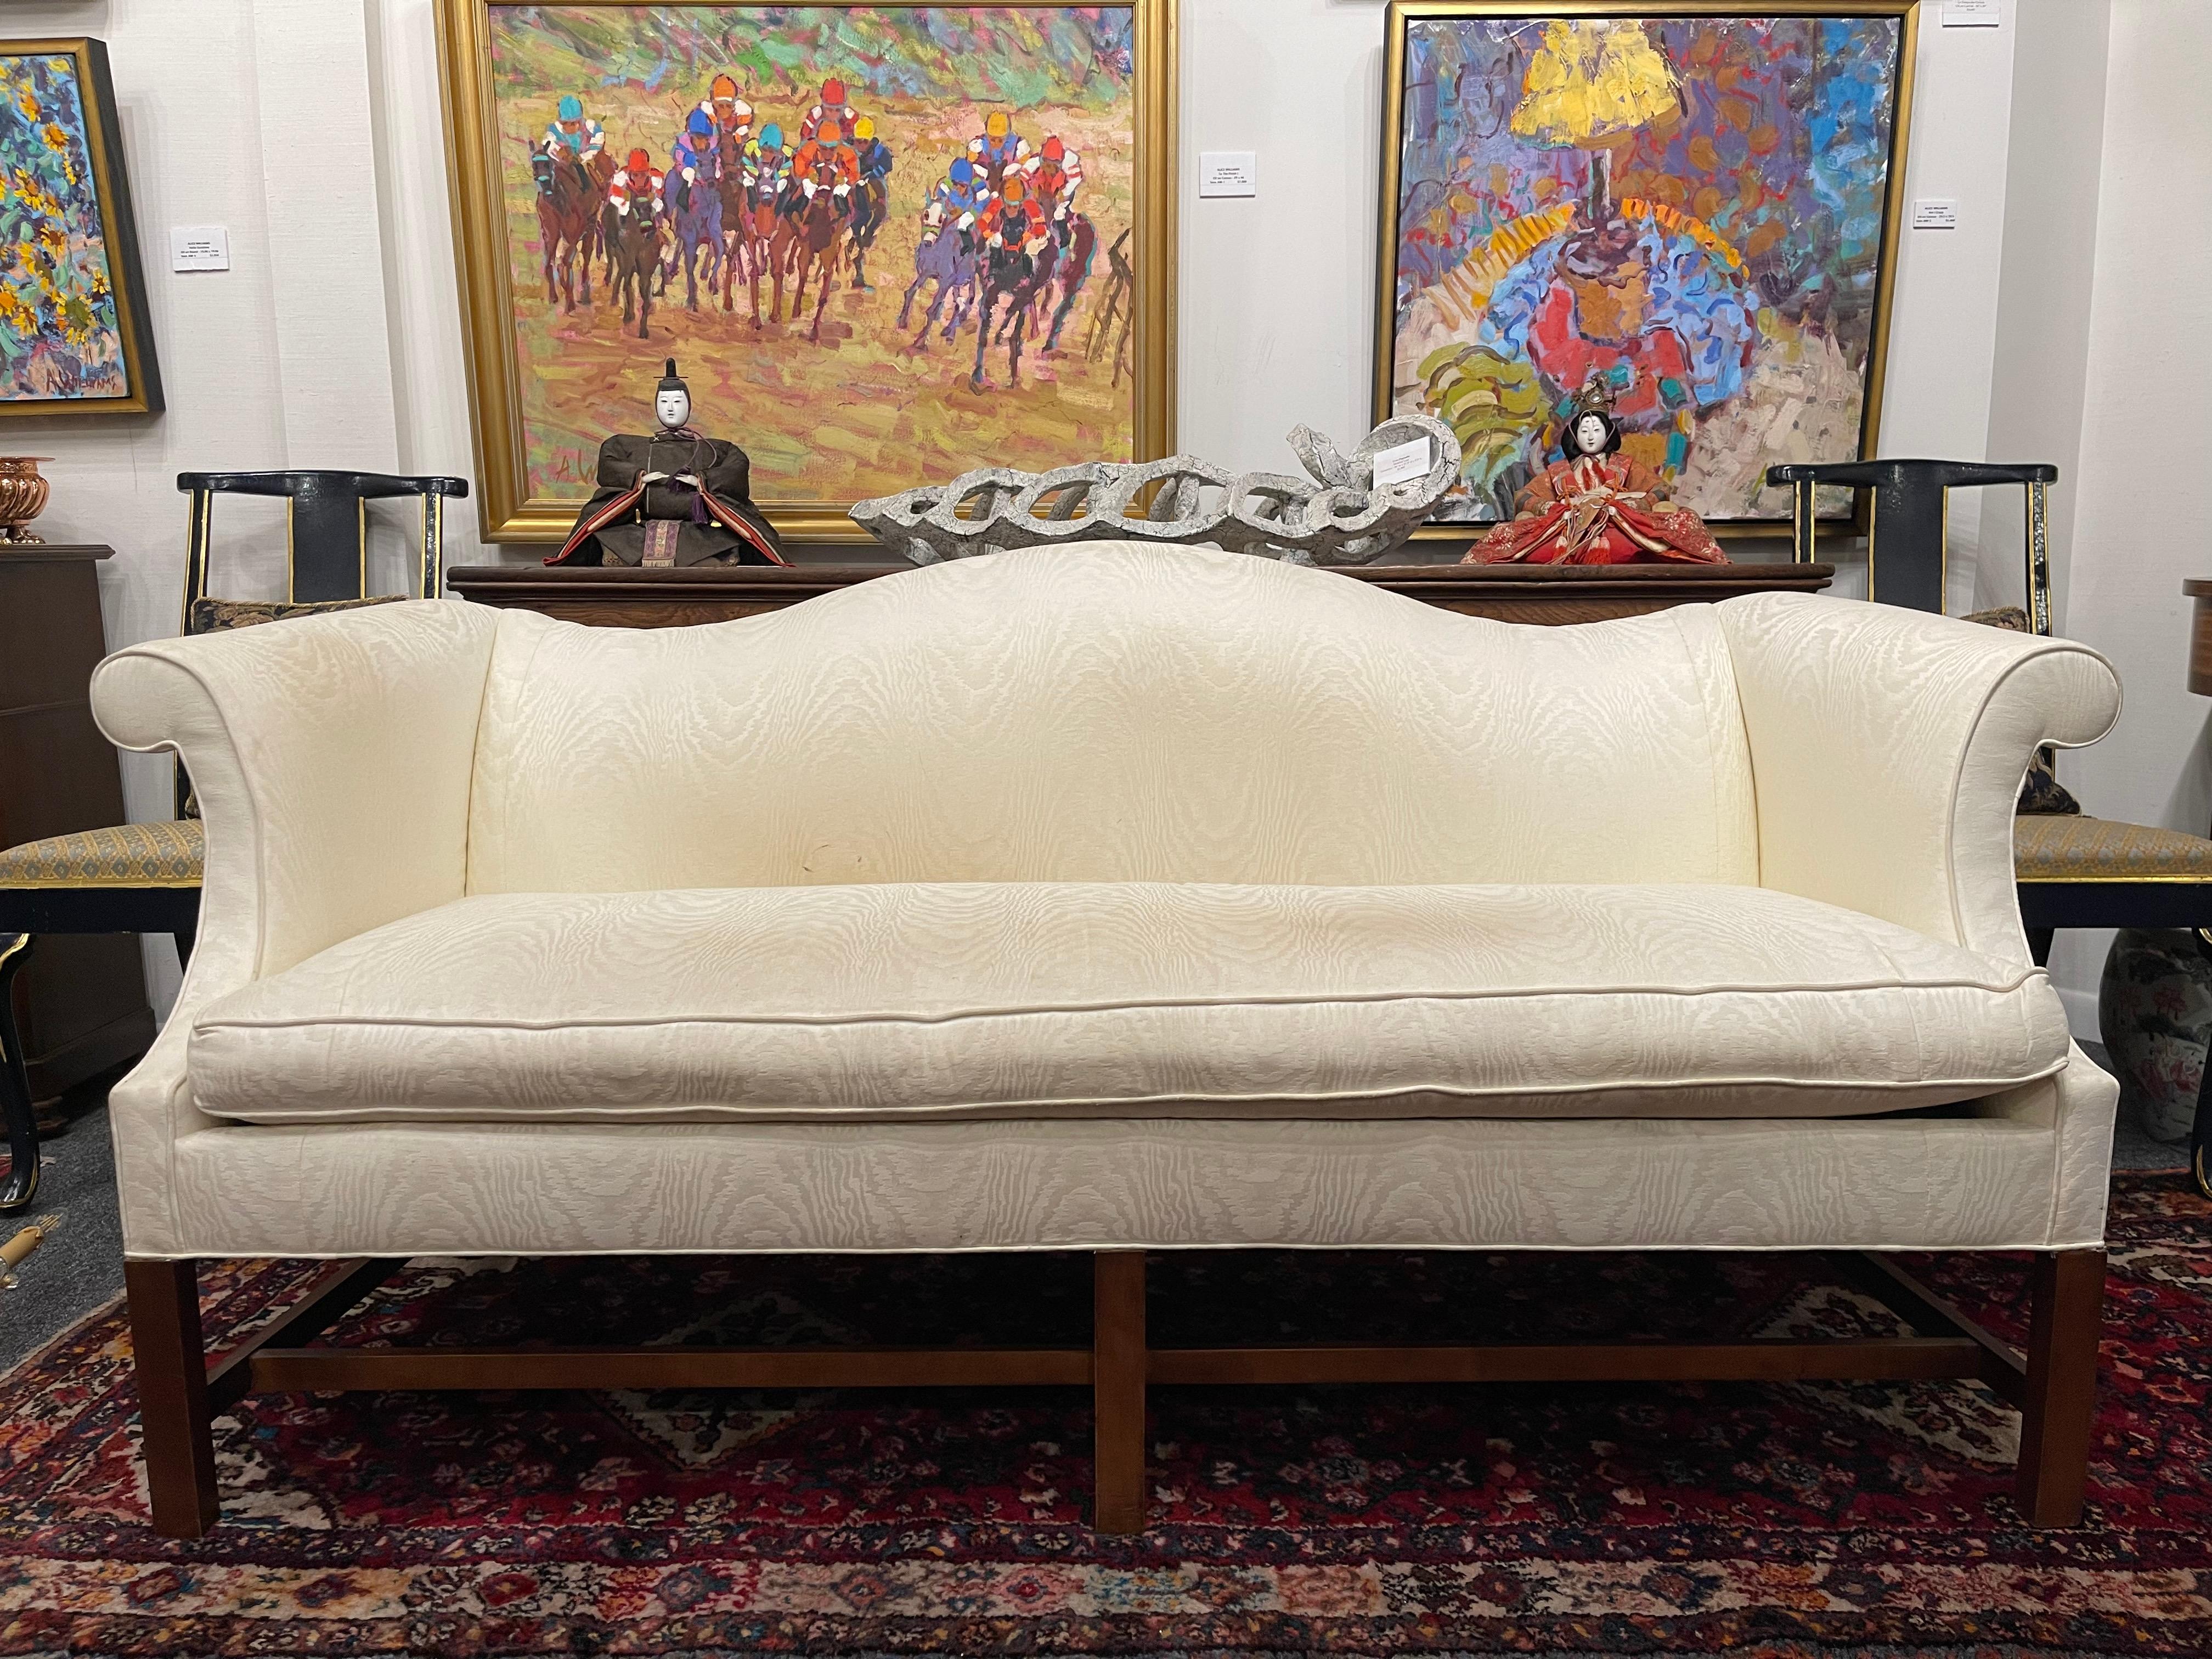 Chippendale style came lback sofa with a single cushion, 20th century. Made by Southwood Furniture maker in Hickory, North Carolina. New Upholstery is required.